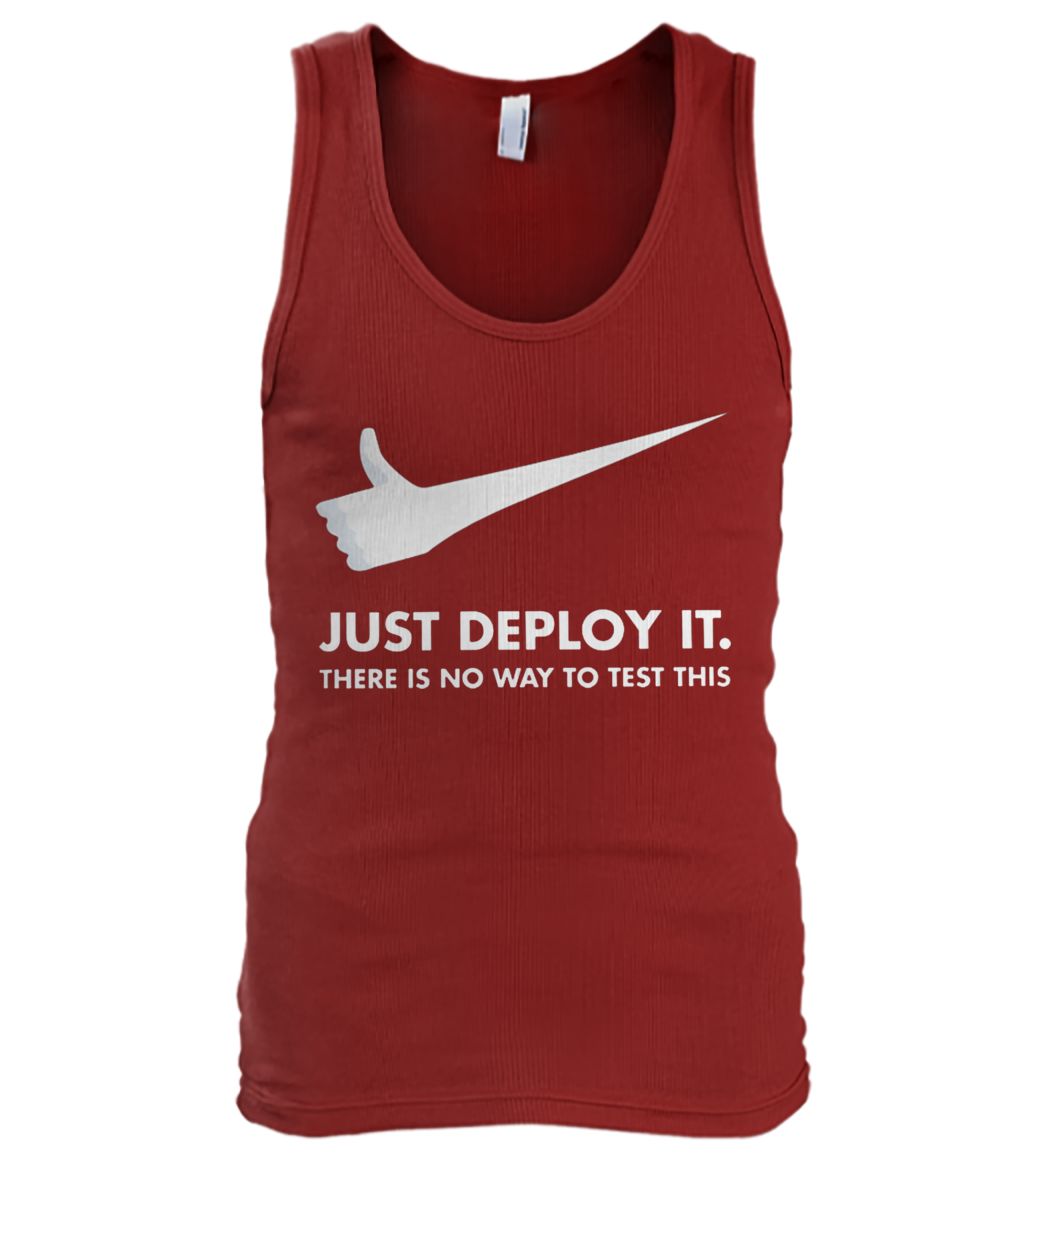 Just deploy it there is no way to test this men's tank top